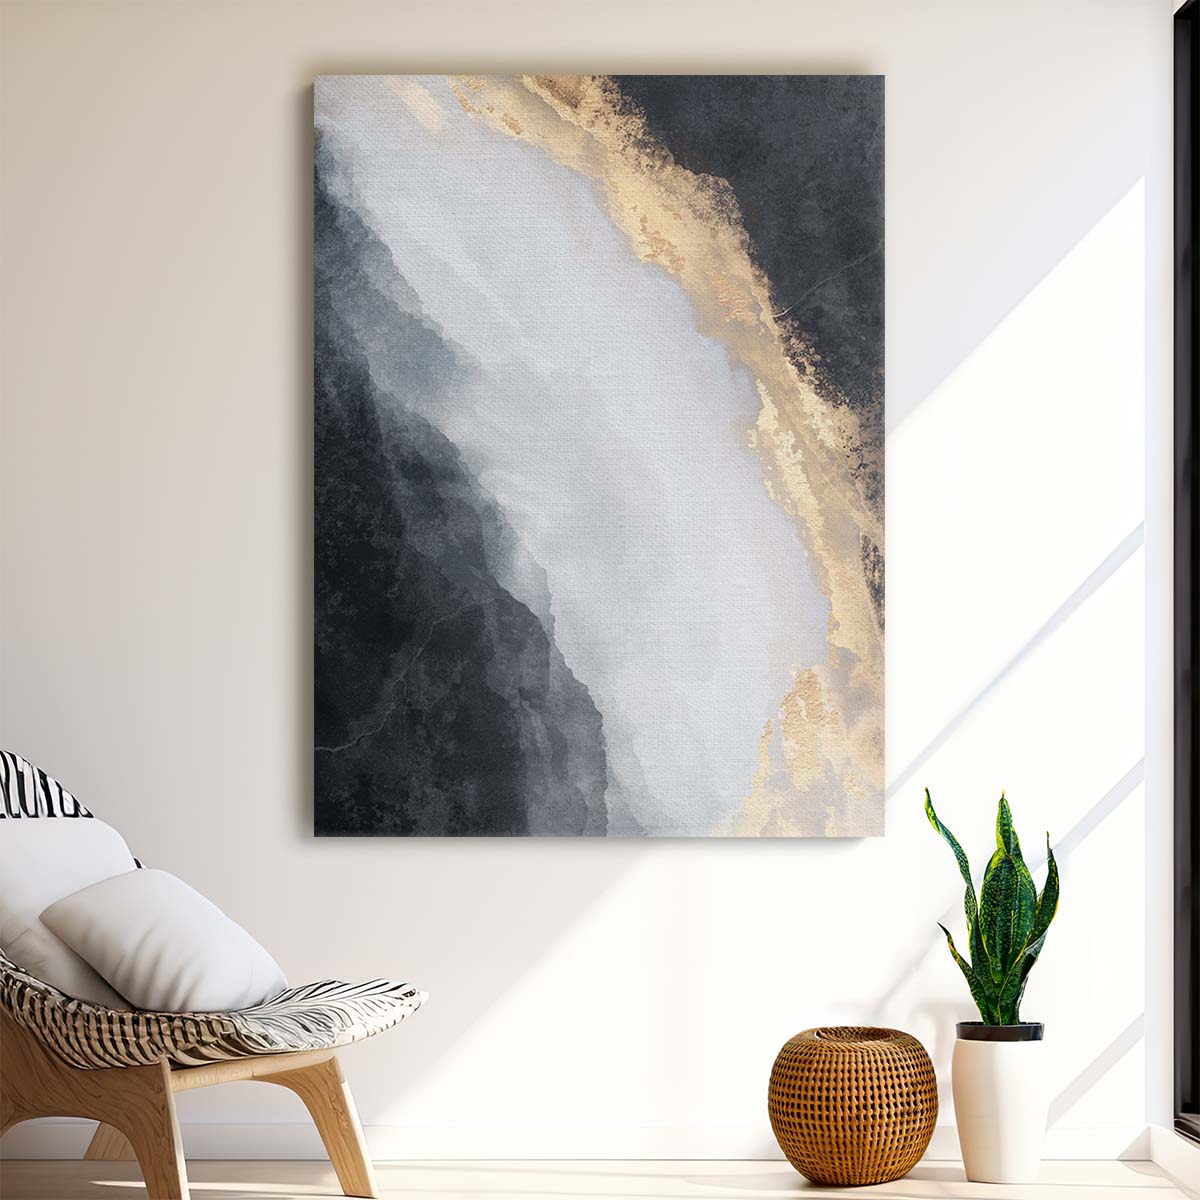 Gold Abstract Illustration - Canvas Painting in Black & White by Luxuriance Designs, made in USA